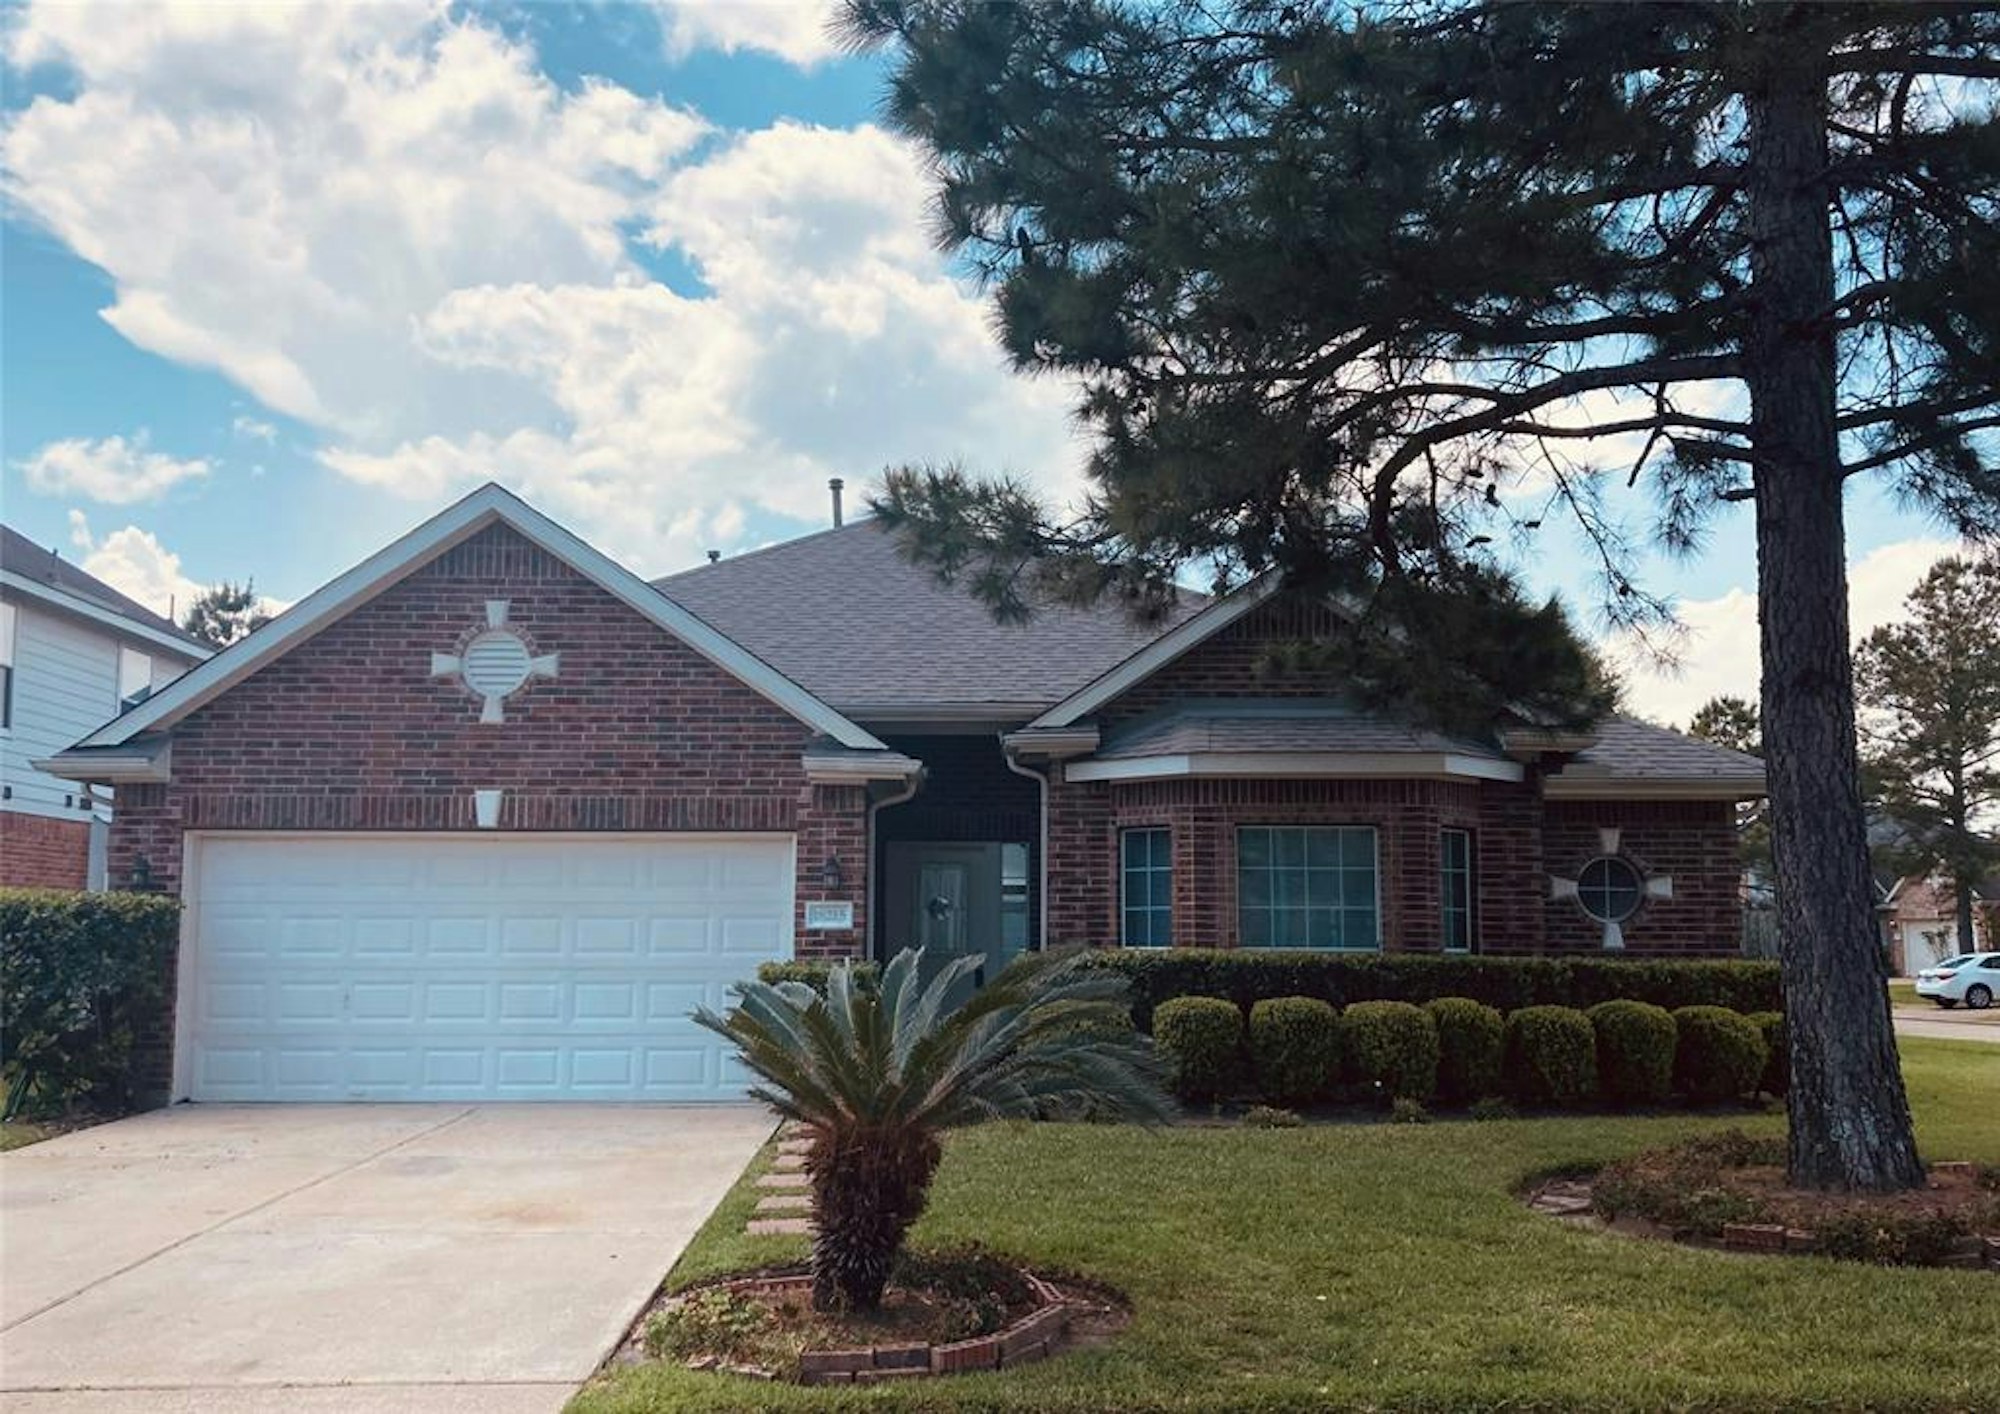 Photo 1 of 15 - 18215 Linden Forest Ln, Katy, TX 77449